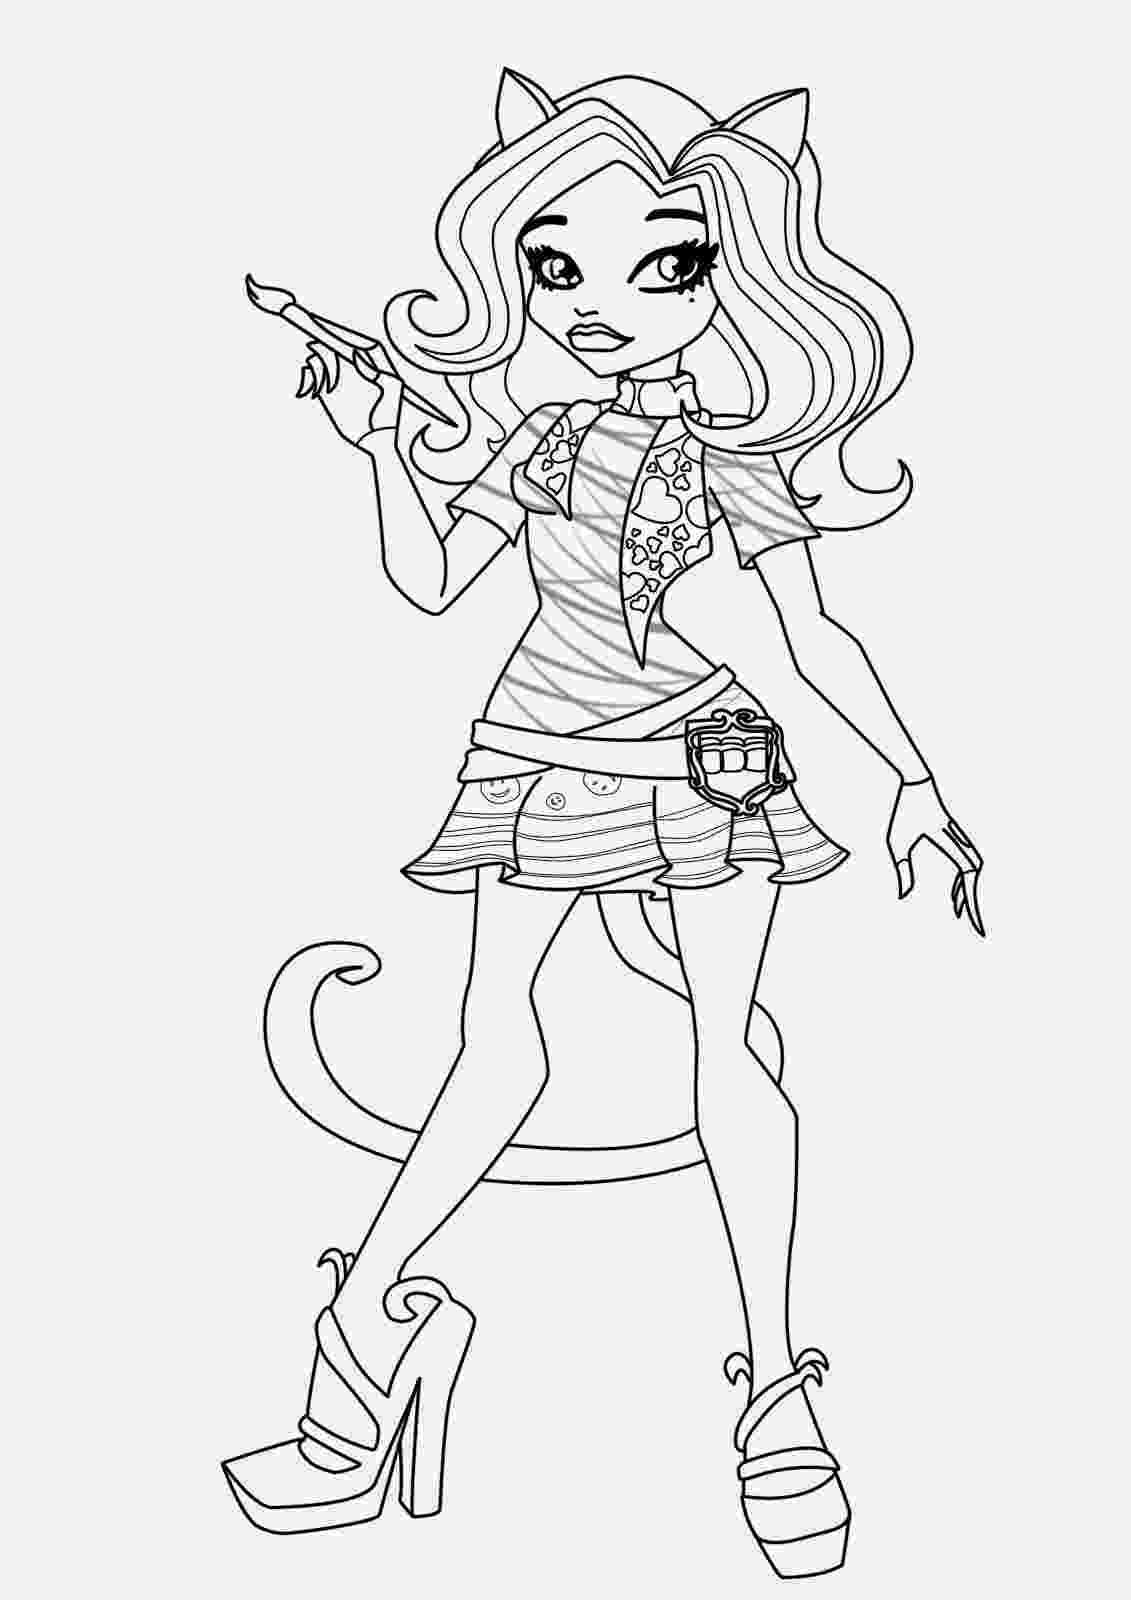 coloring pages online monster high coloring pages monster high page 1 printable coloring coloring pages monster high online 